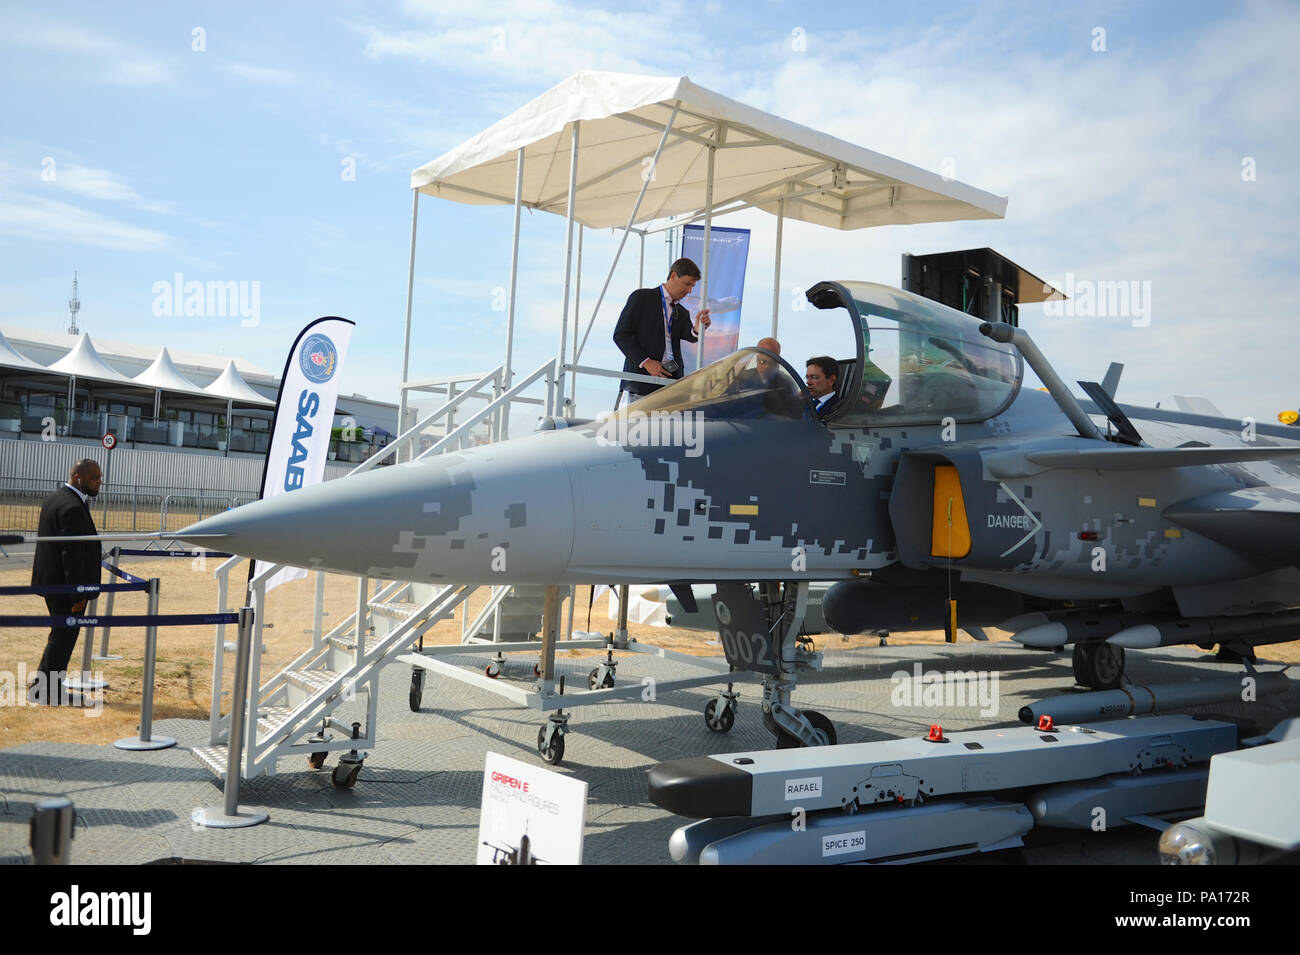 farnborough-hampshire-uk-19th-july-2018-buyers-sitting-in-the-cockpit-of-a-full-scale-mock-up-of-a-saab-jas-39-gripen-light-single-engine-multirole-fighter-aircraft-on-day-four-of-the-farnborough-international-airshow-fia-which-is-taking-place-in-farnborough-hampshire-uk-the-air-show-a-biannual-showcase-for-the-aviation-industry-is-the-biggest-of-its-kind-and-attracts-civil-and-military-buyers-from-all-over-the-world-trade-visitors-are-normally-in-excess-of-100000-people-credit-michael-prestonalamy-live-news-PA172R.jpg